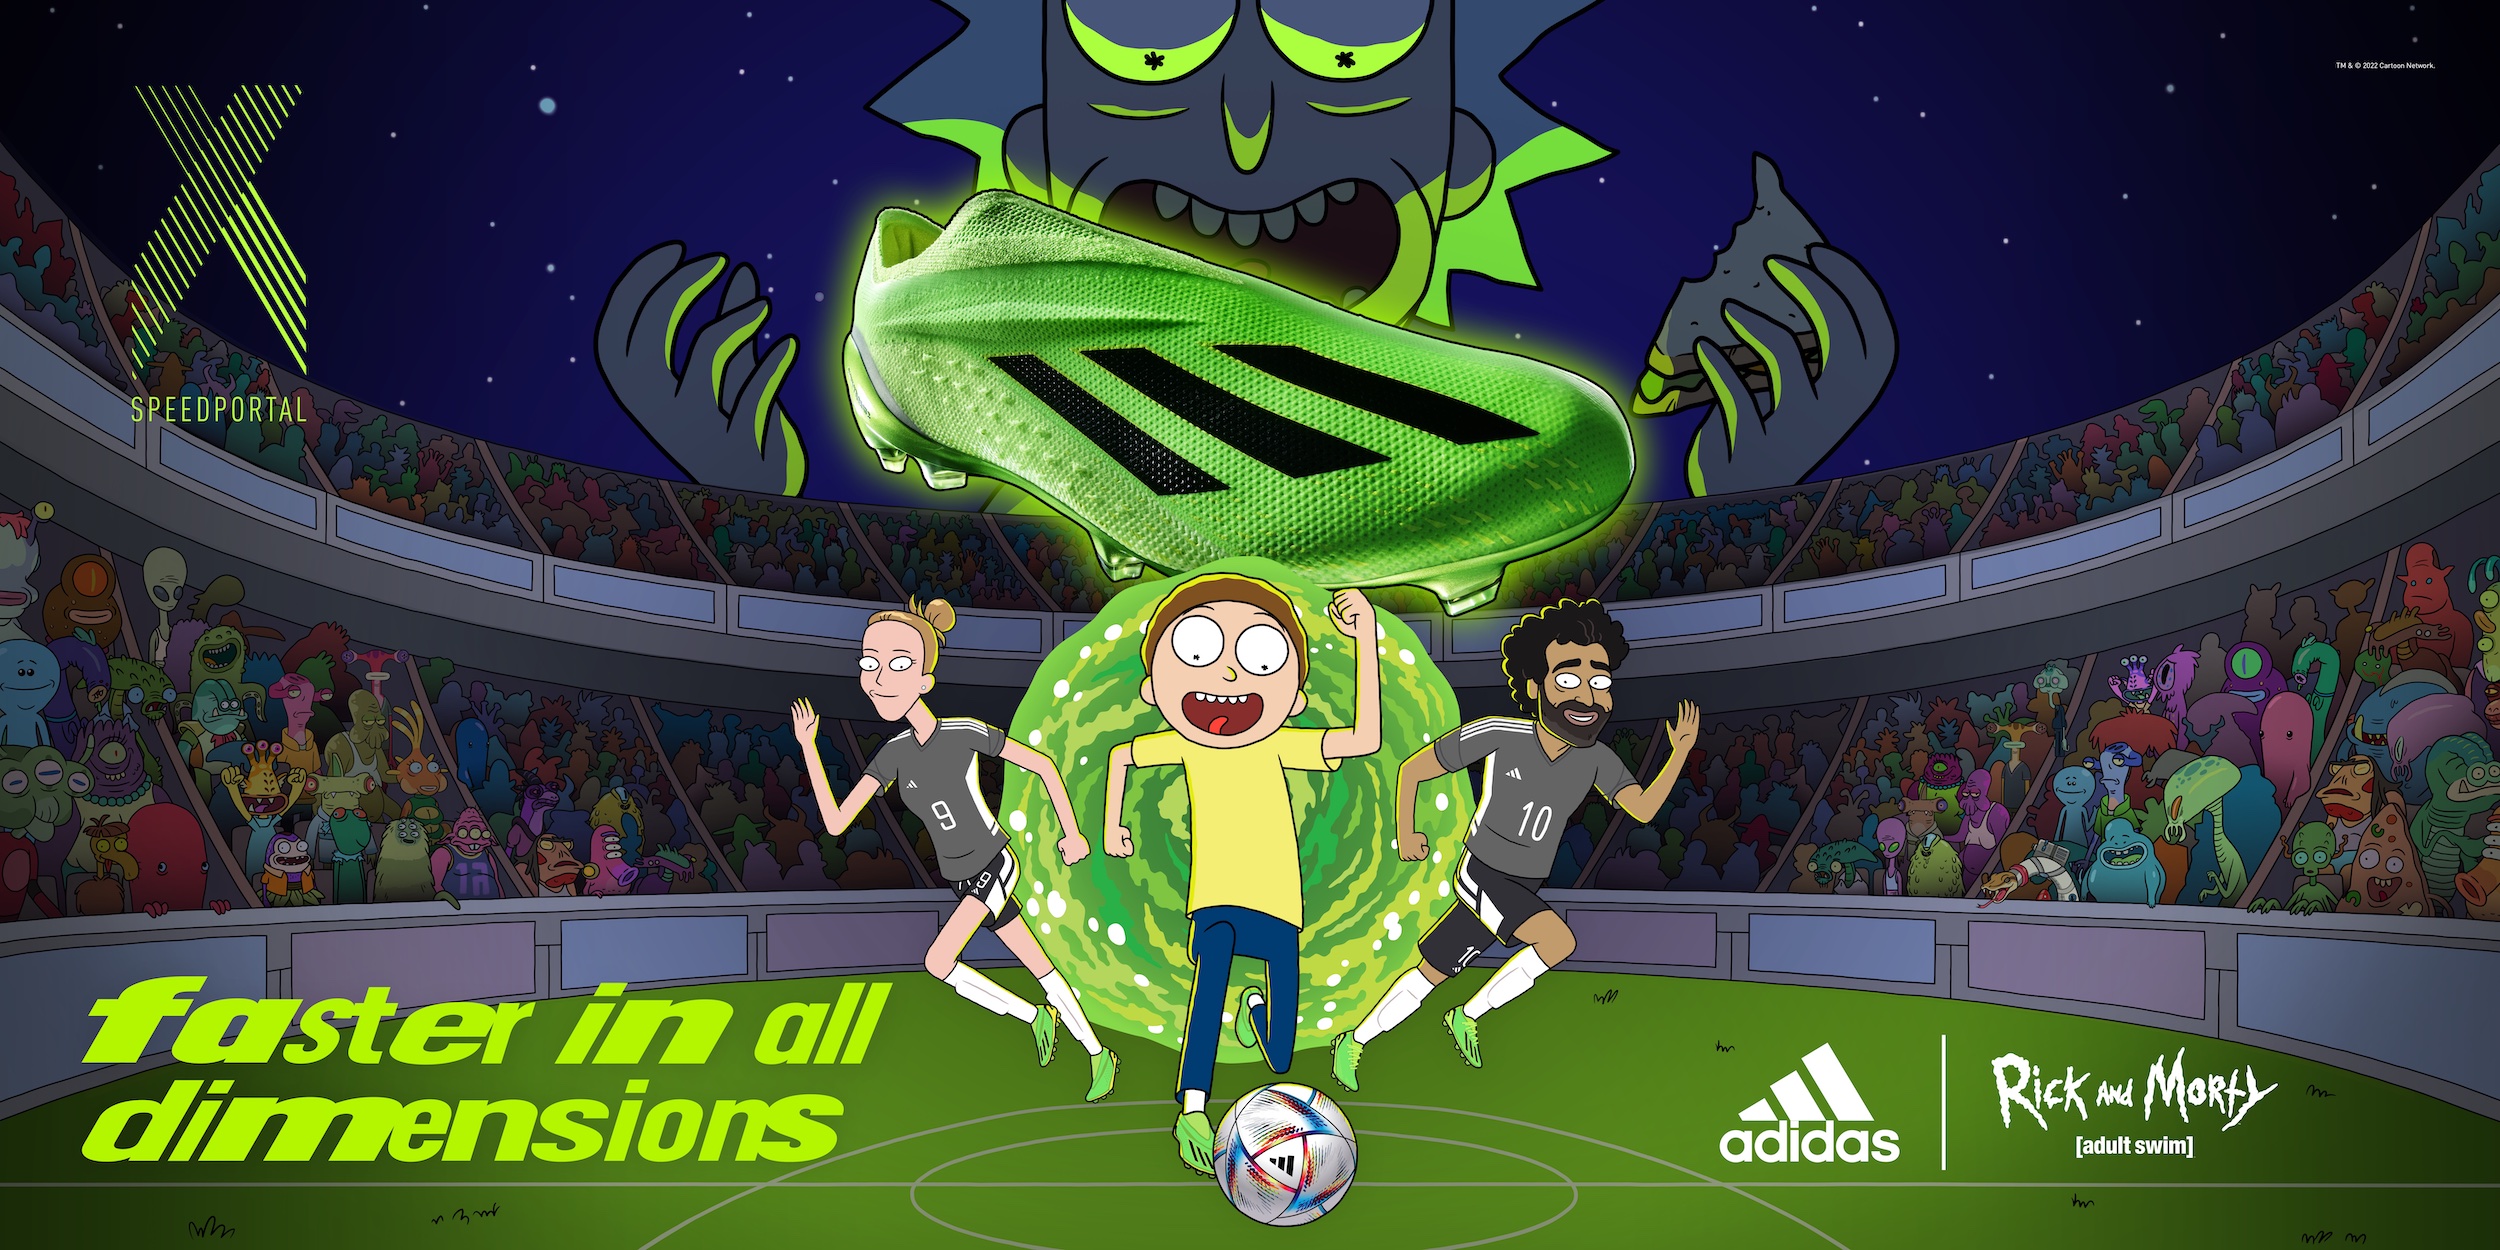 Morty from Rick and Morty comes out of a portal and kicks a soccer ball into the arena while wearing adidas